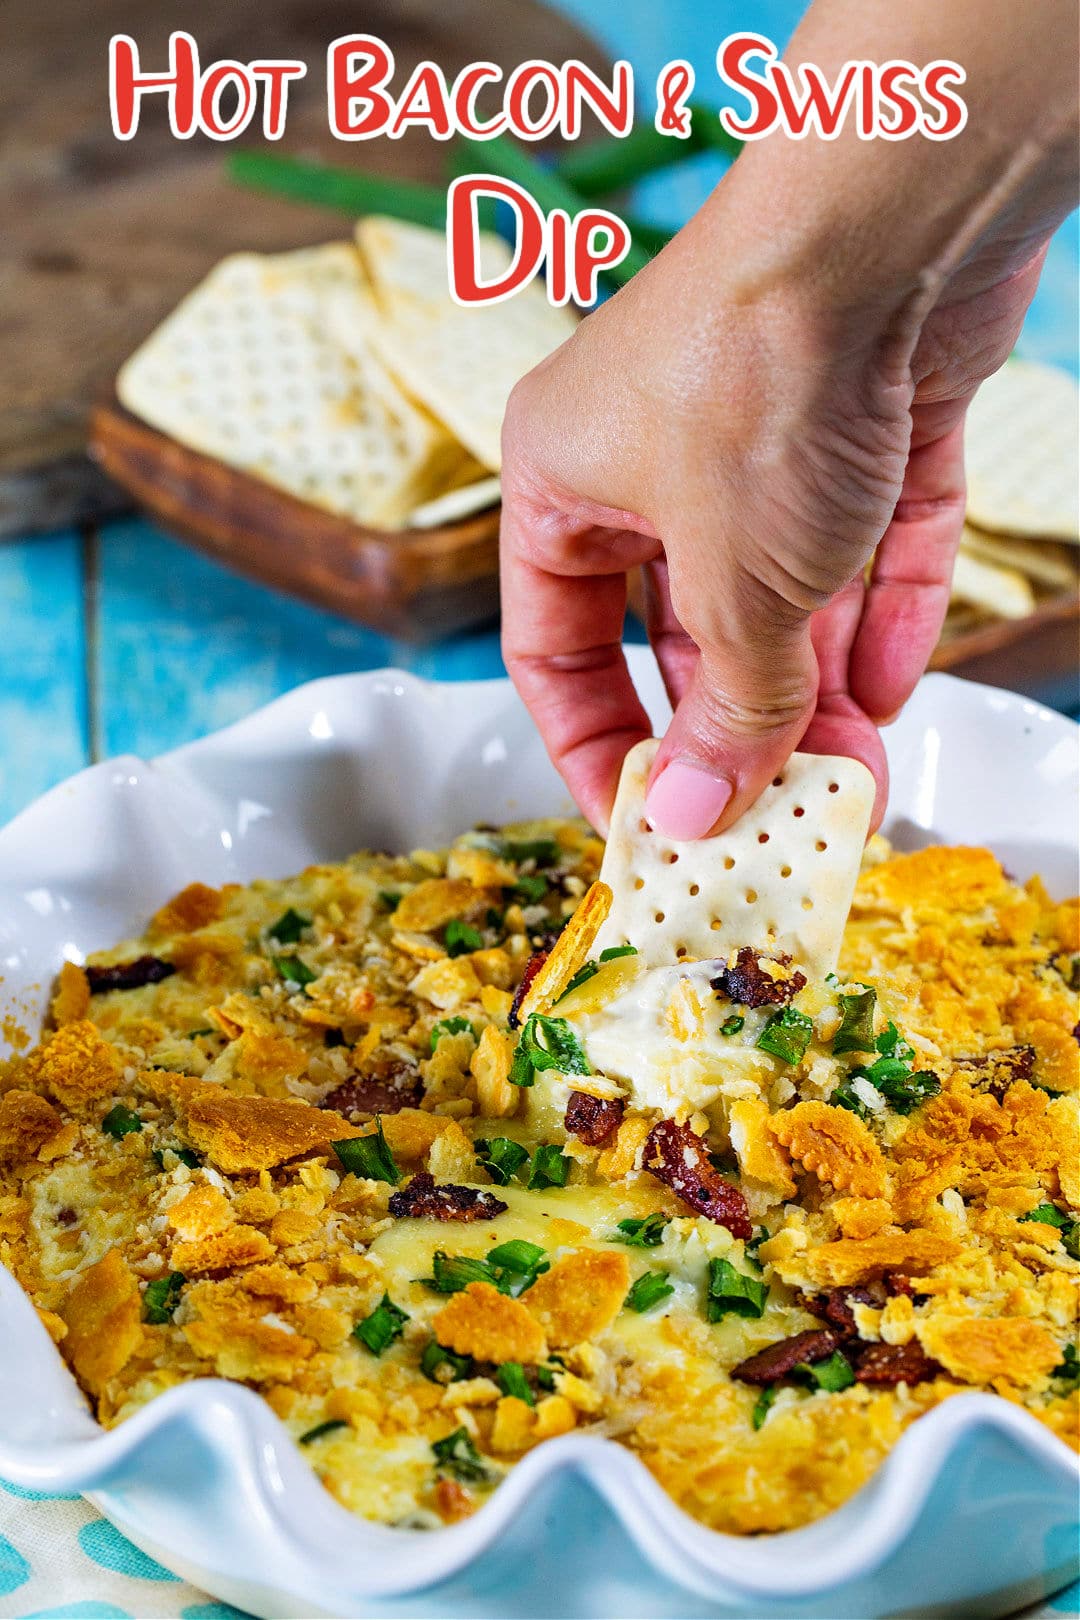 Hand dipping a cracker into Hot Bacon and Swiss Dip.